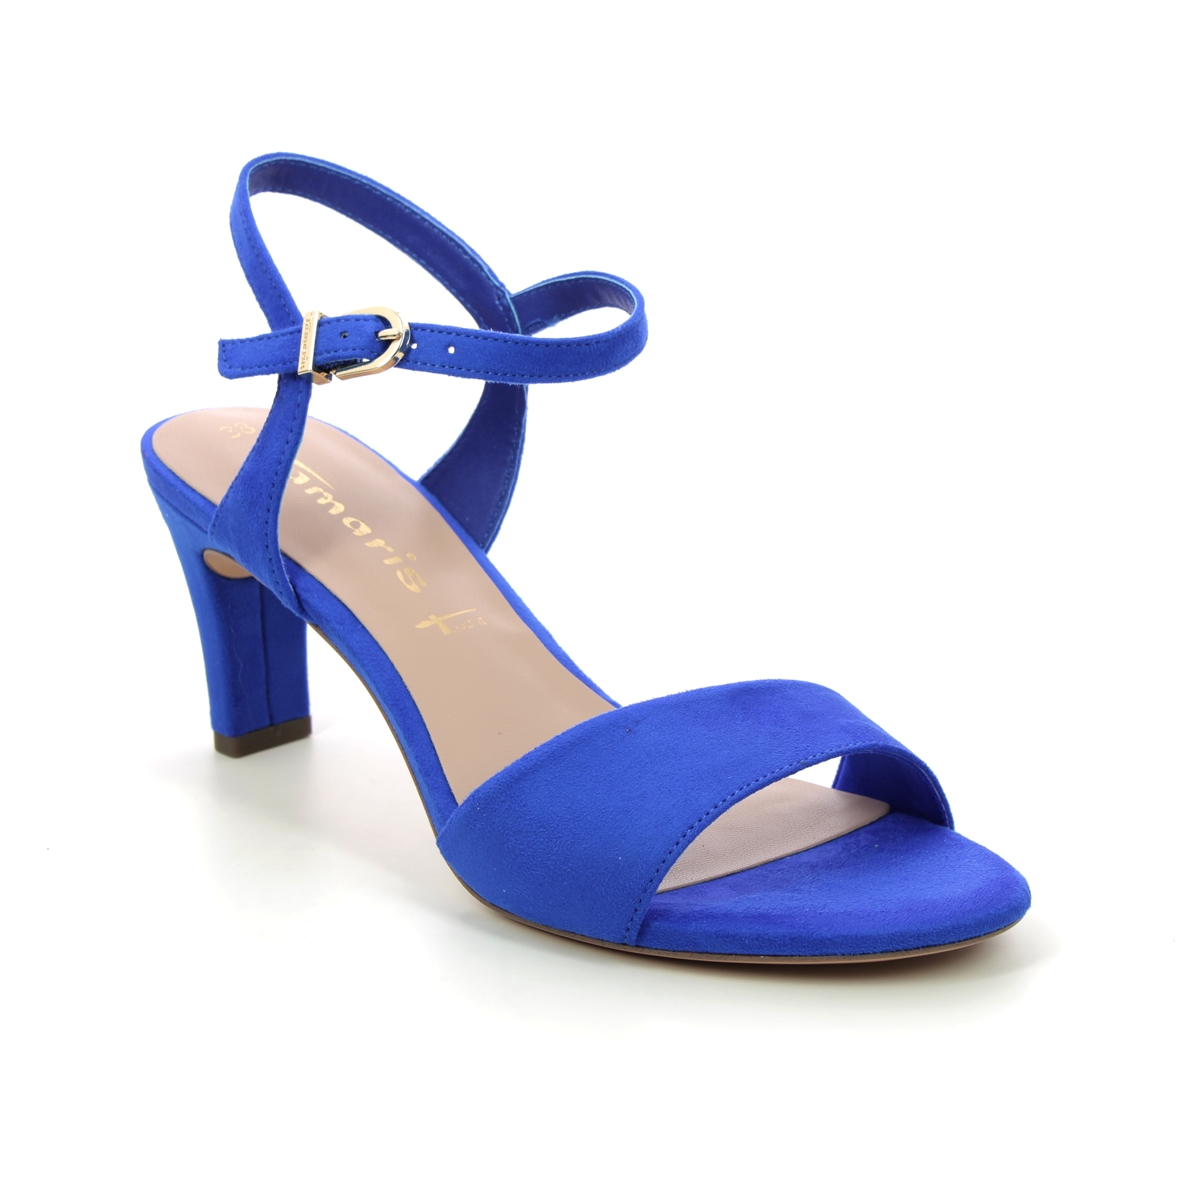 Tamaris Meliah Blue Womens Heeled Sandals 28028-42-187 in a Plain Textile in Size 39